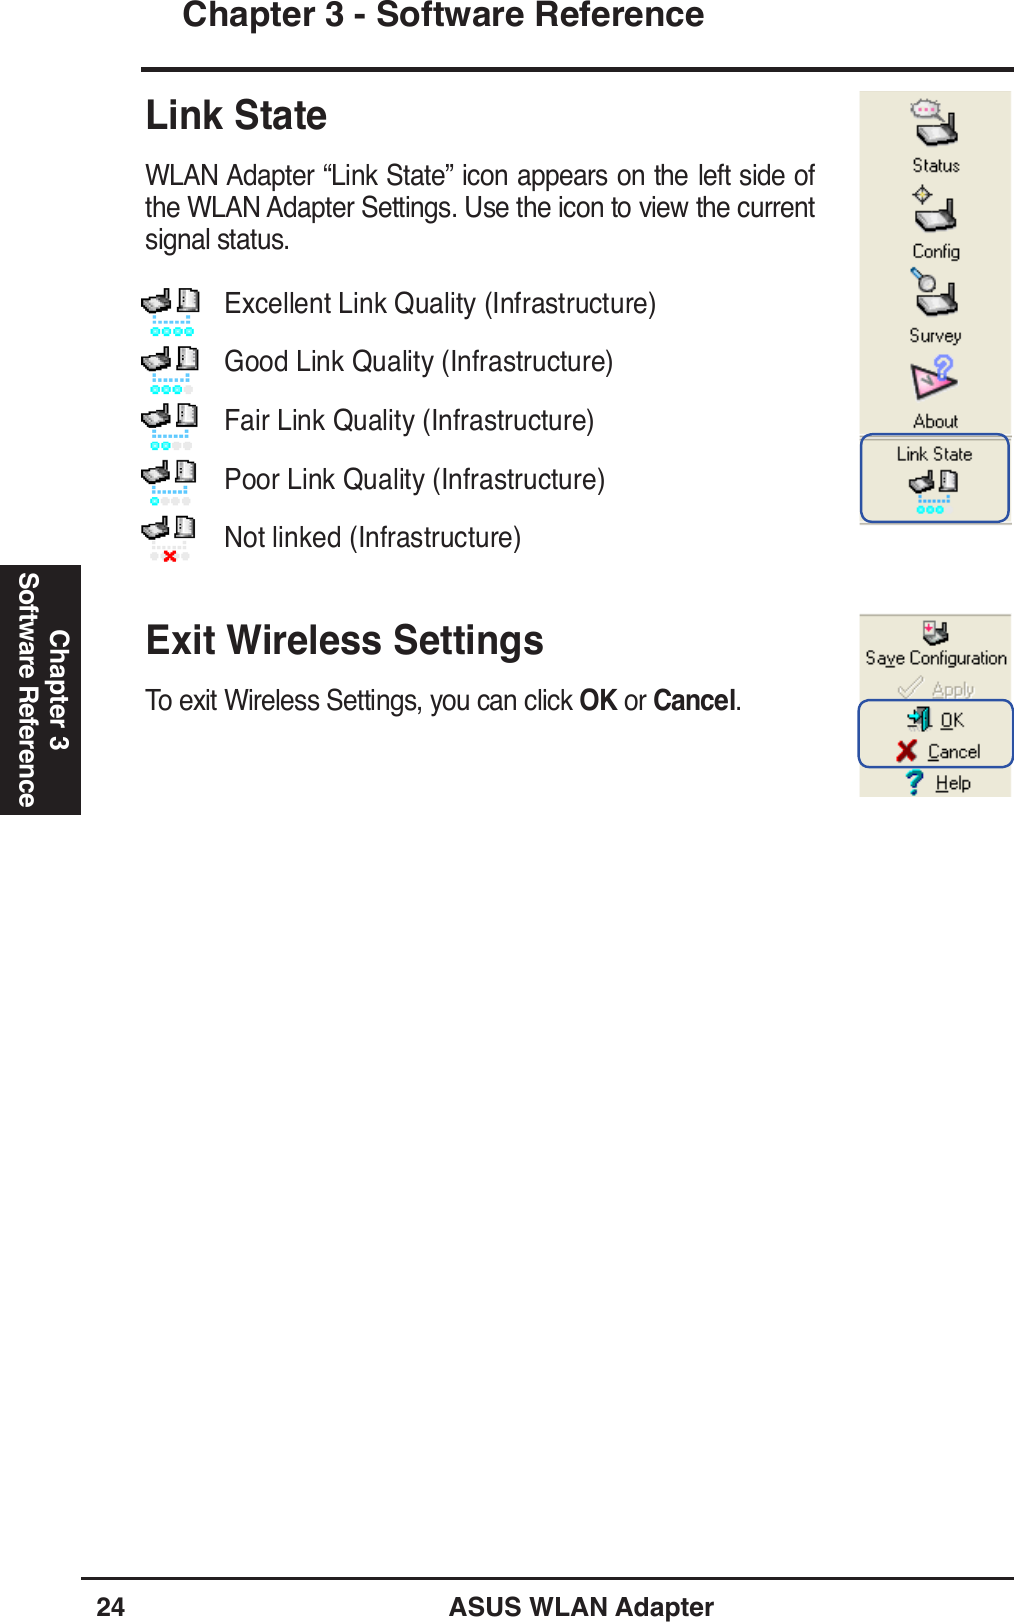 24 ASUS WLAN AdapterChapter 3 - Software ReferenceChapter 3Software ReferenceLink StateWLAN Adapter “Link State” icon appears on the left side of the WLAN Adapter Settings. Use the icon to view the current signal status.Exit Wireless SettingsTo exit Wireless Settings, you can click OK or Cancel. Excellent Link Quality (Infrastructure)Good Link Quality (Infrastructure)Fair Link Quality (Infrastructure)Poor Link Quality (Infrastructure)Not linked (Infrastructure)